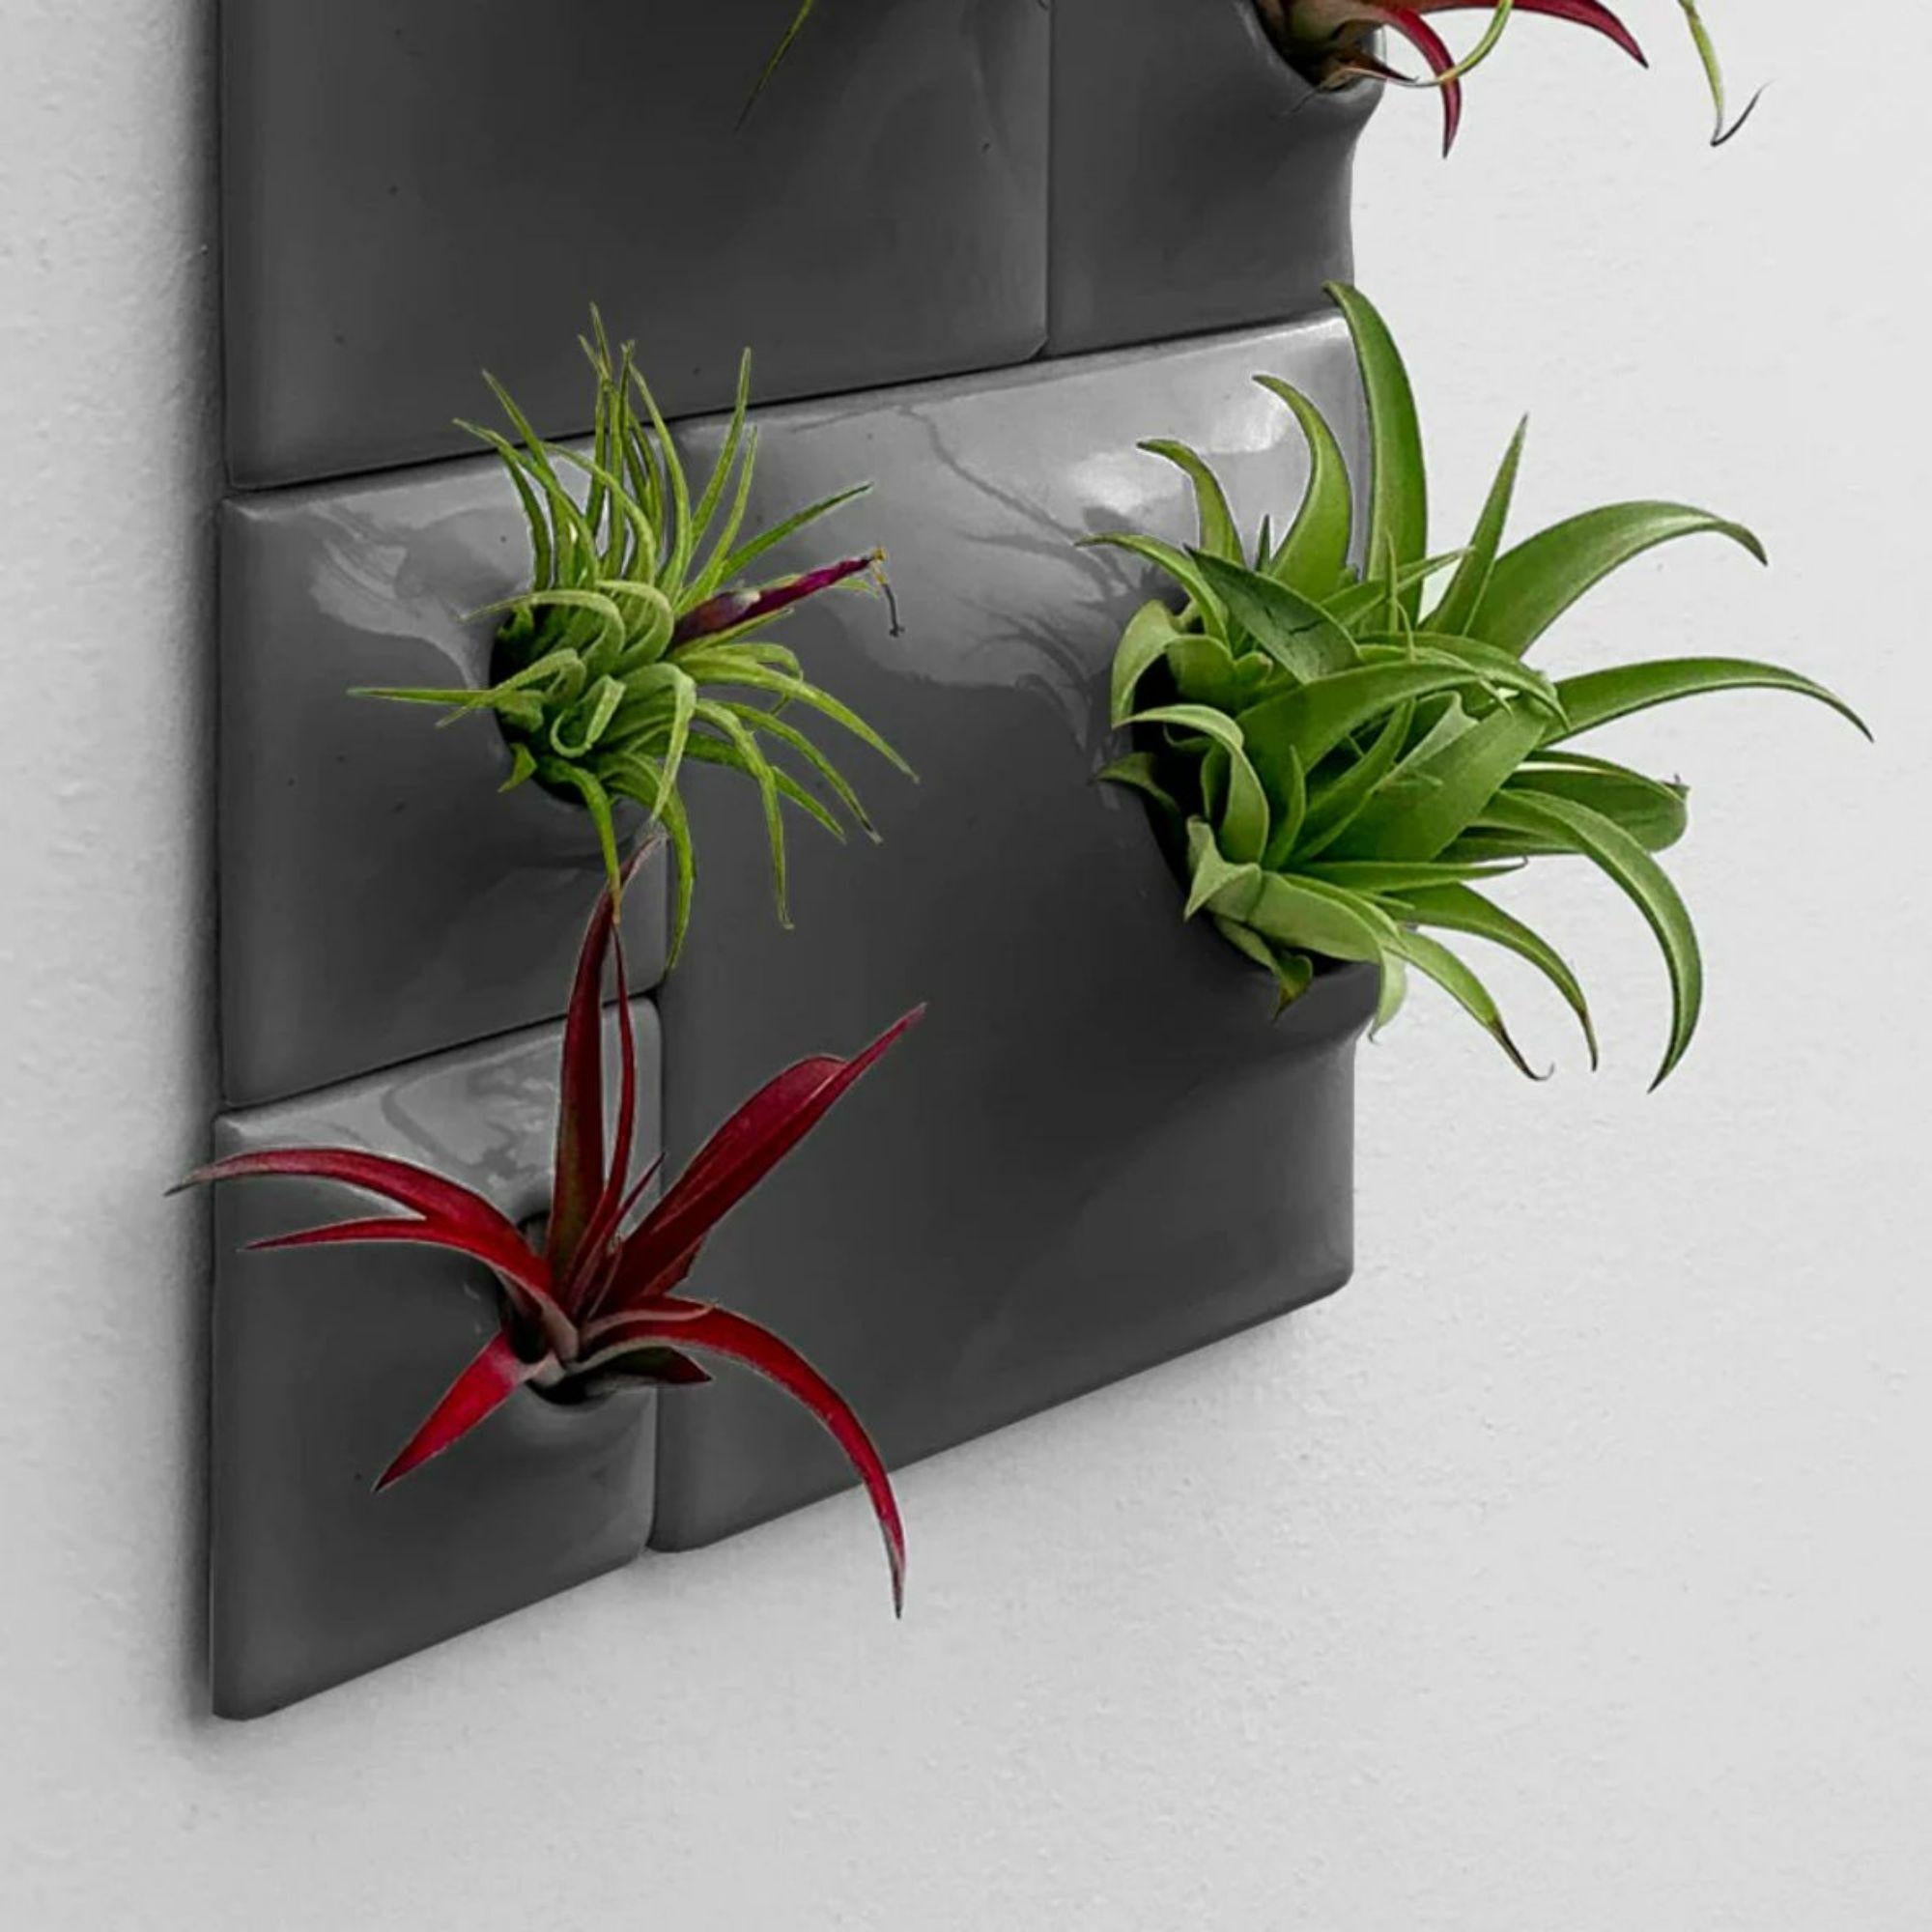 Modern Gray Wall Planter Set, Biophilic Wall Sculpture, Moss Wall Art, Node BR3D In New Condition For Sale In Bridgeport, PA